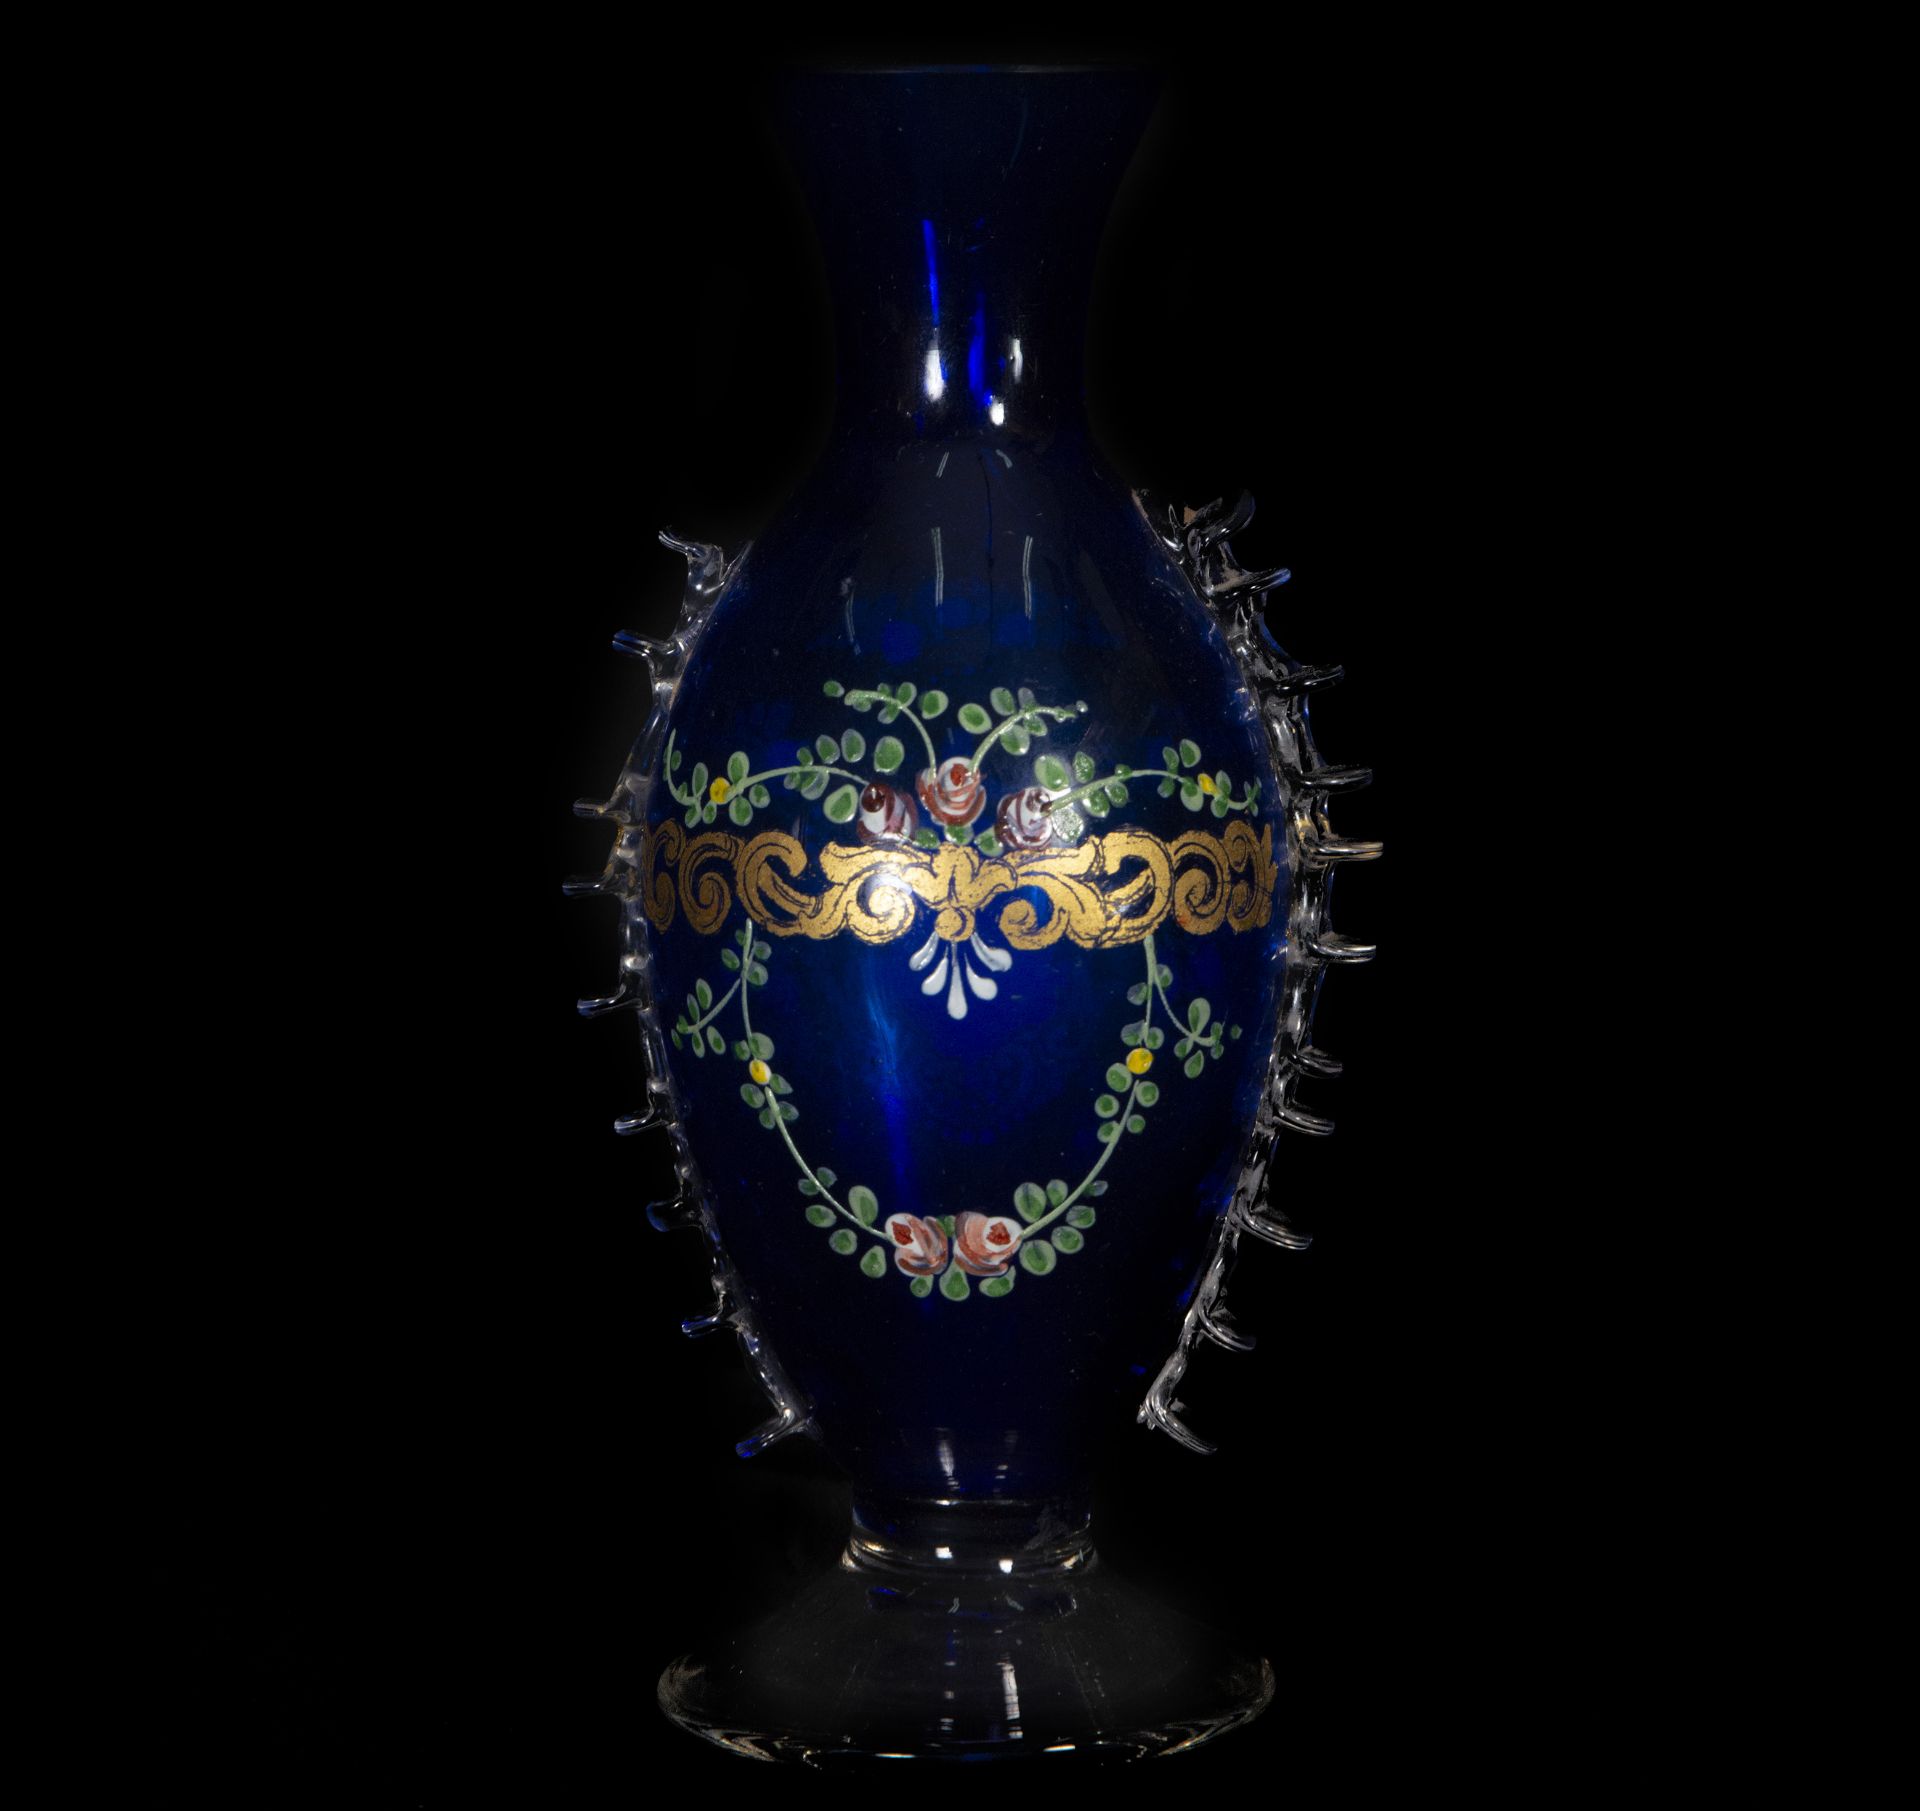 Bohemian glass cup and bottle, 19th century - Image 6 of 6